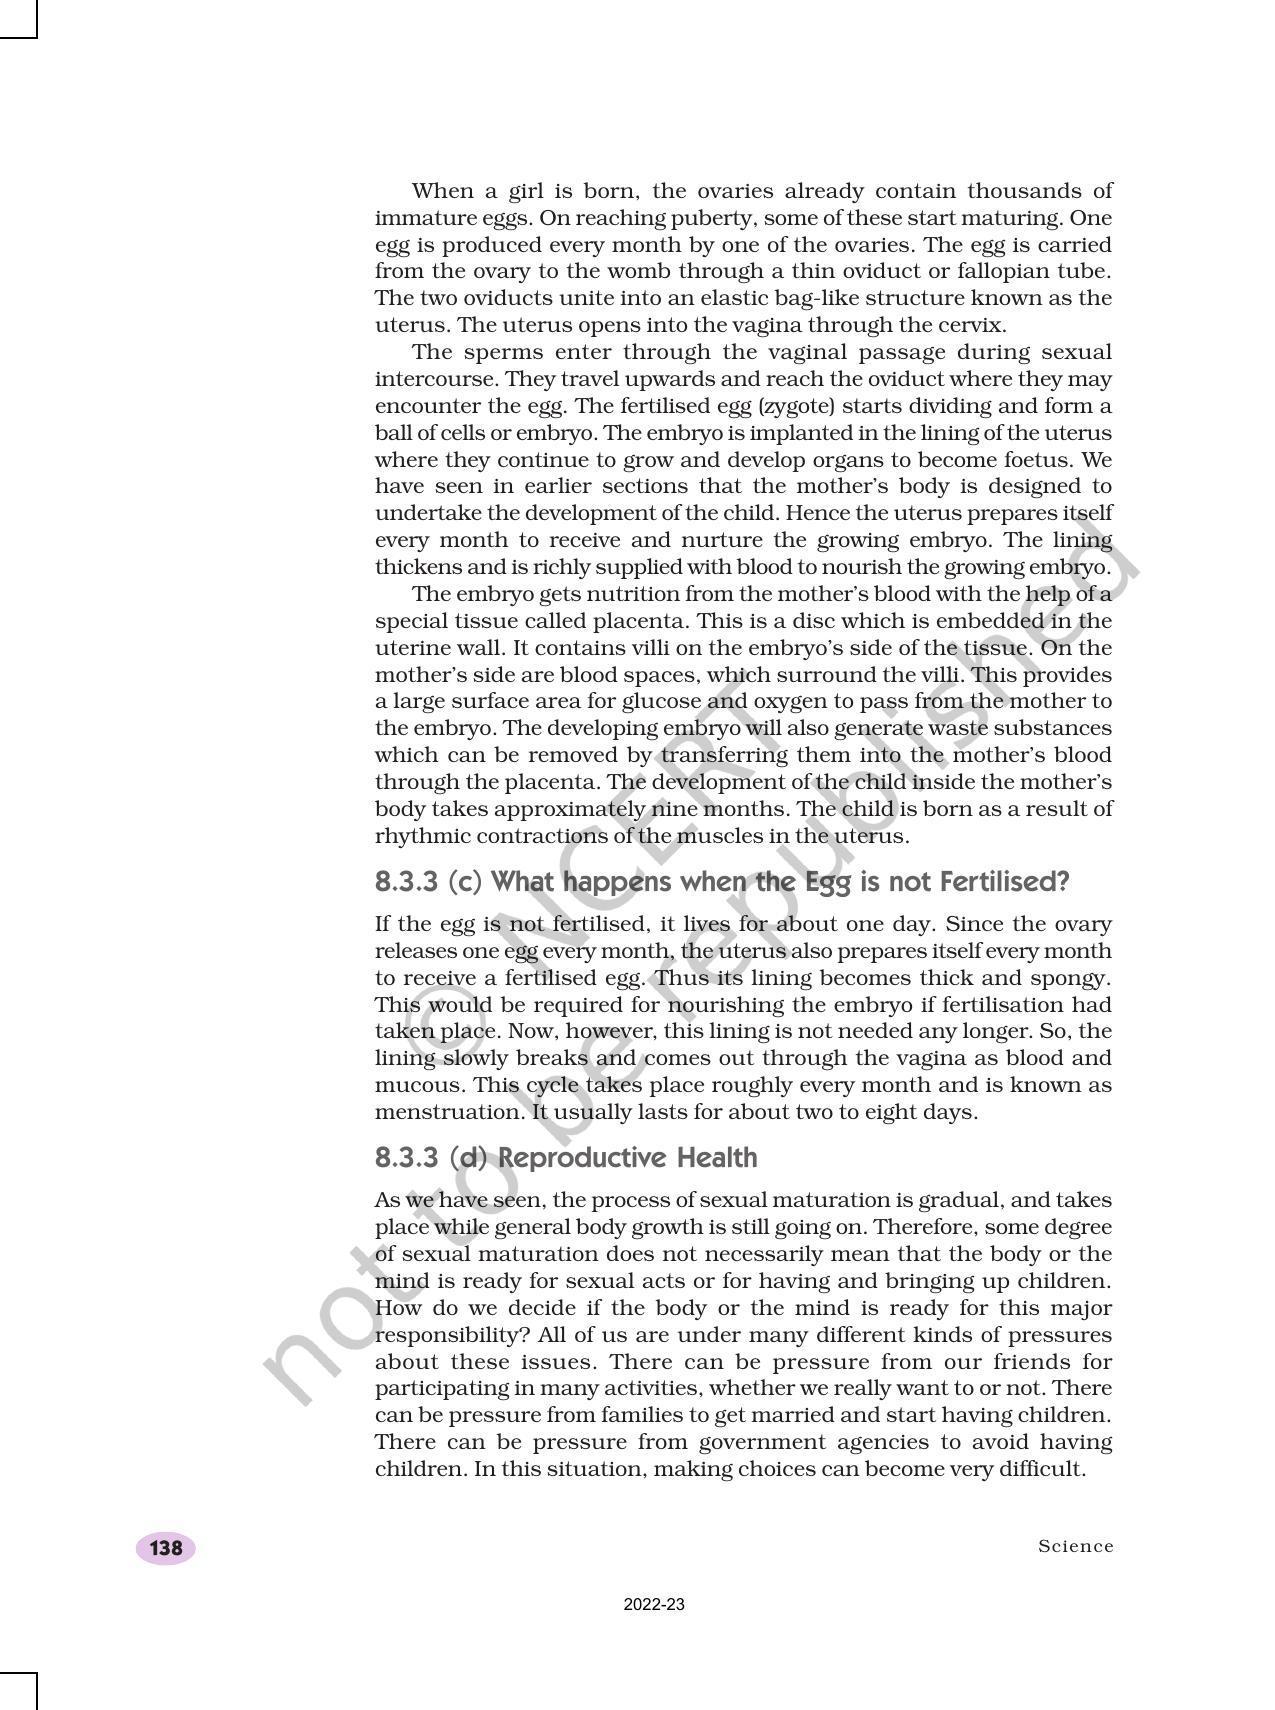 NCERT Book for Class 10 Science Chapter 8 How do Organisms Reproduce? - Page 12